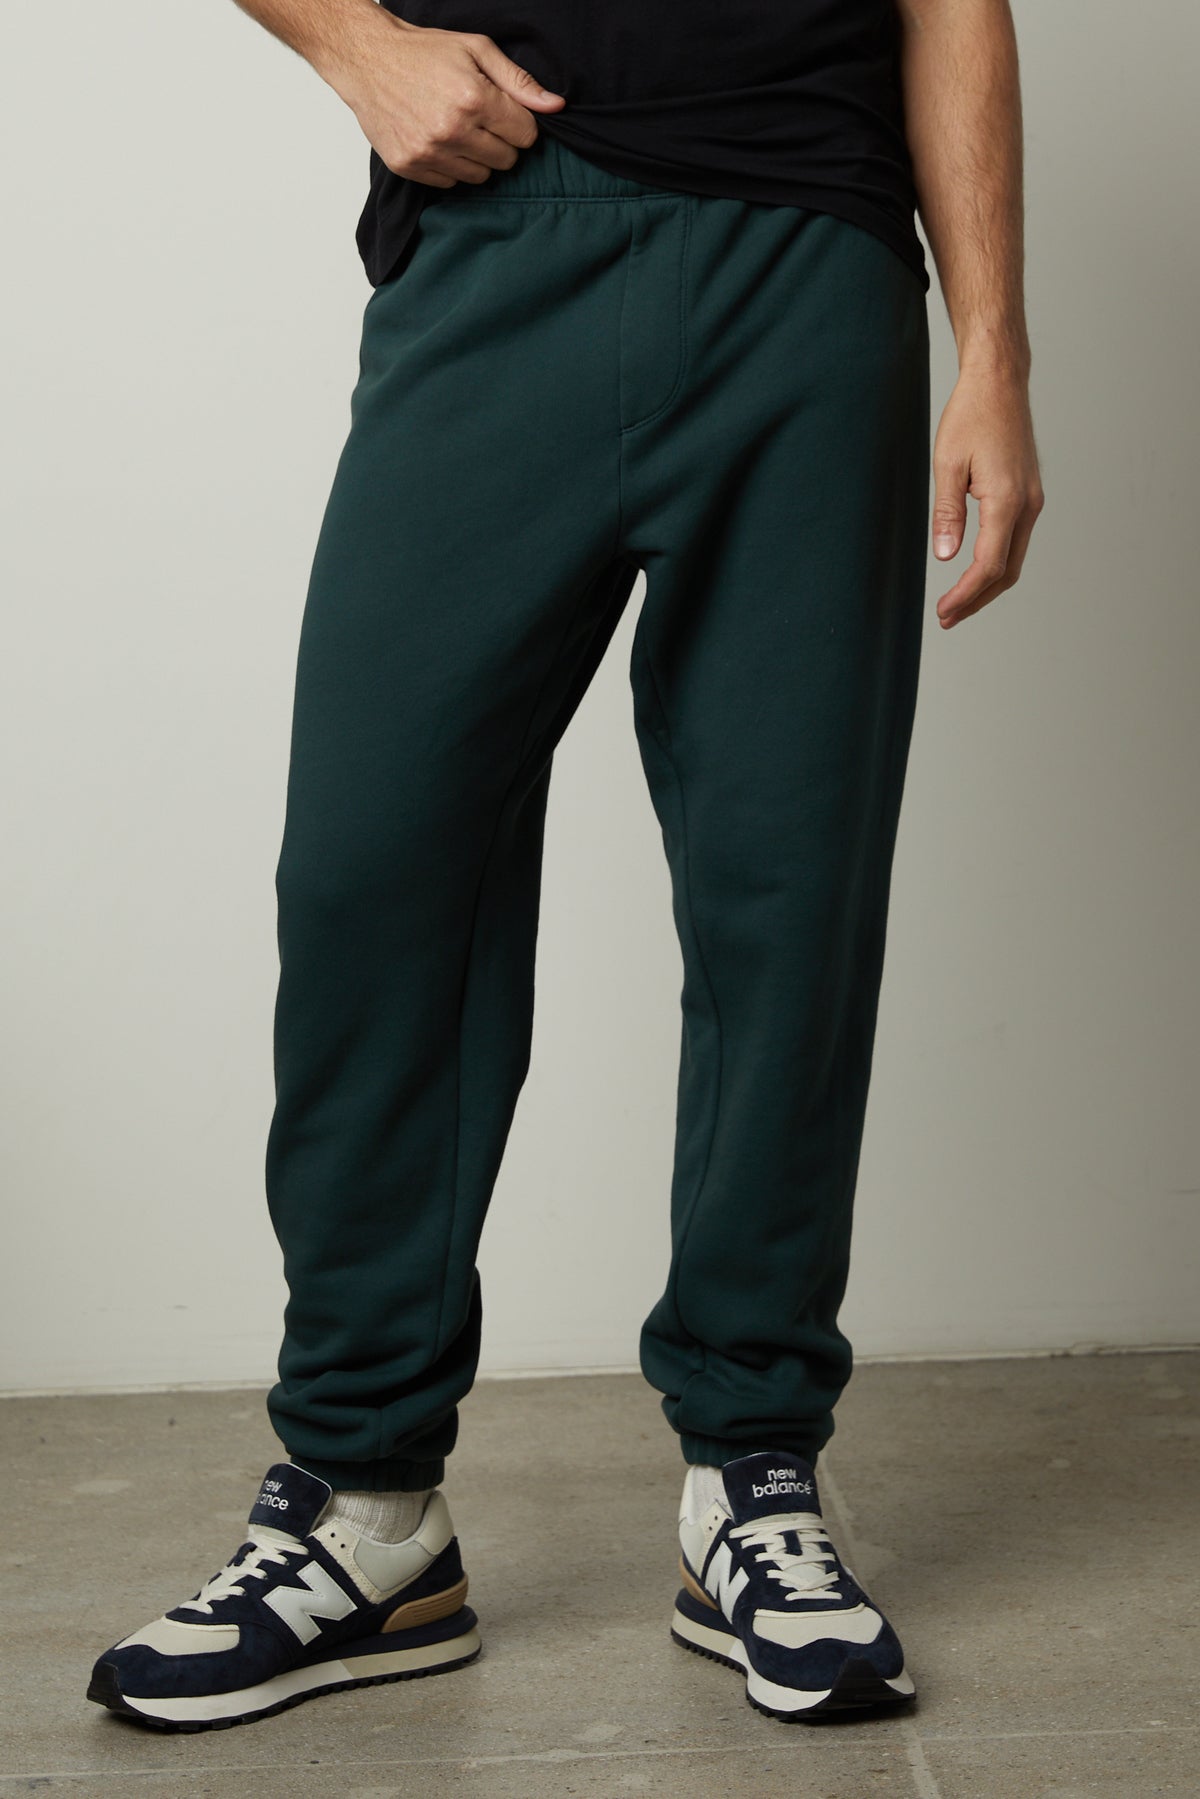 A man wearing Velvet by Graham & Spencer's MONTGOMERY BRUSHED FLEECE SWEATPANT with elastic waist and cuffs.-35231570362561